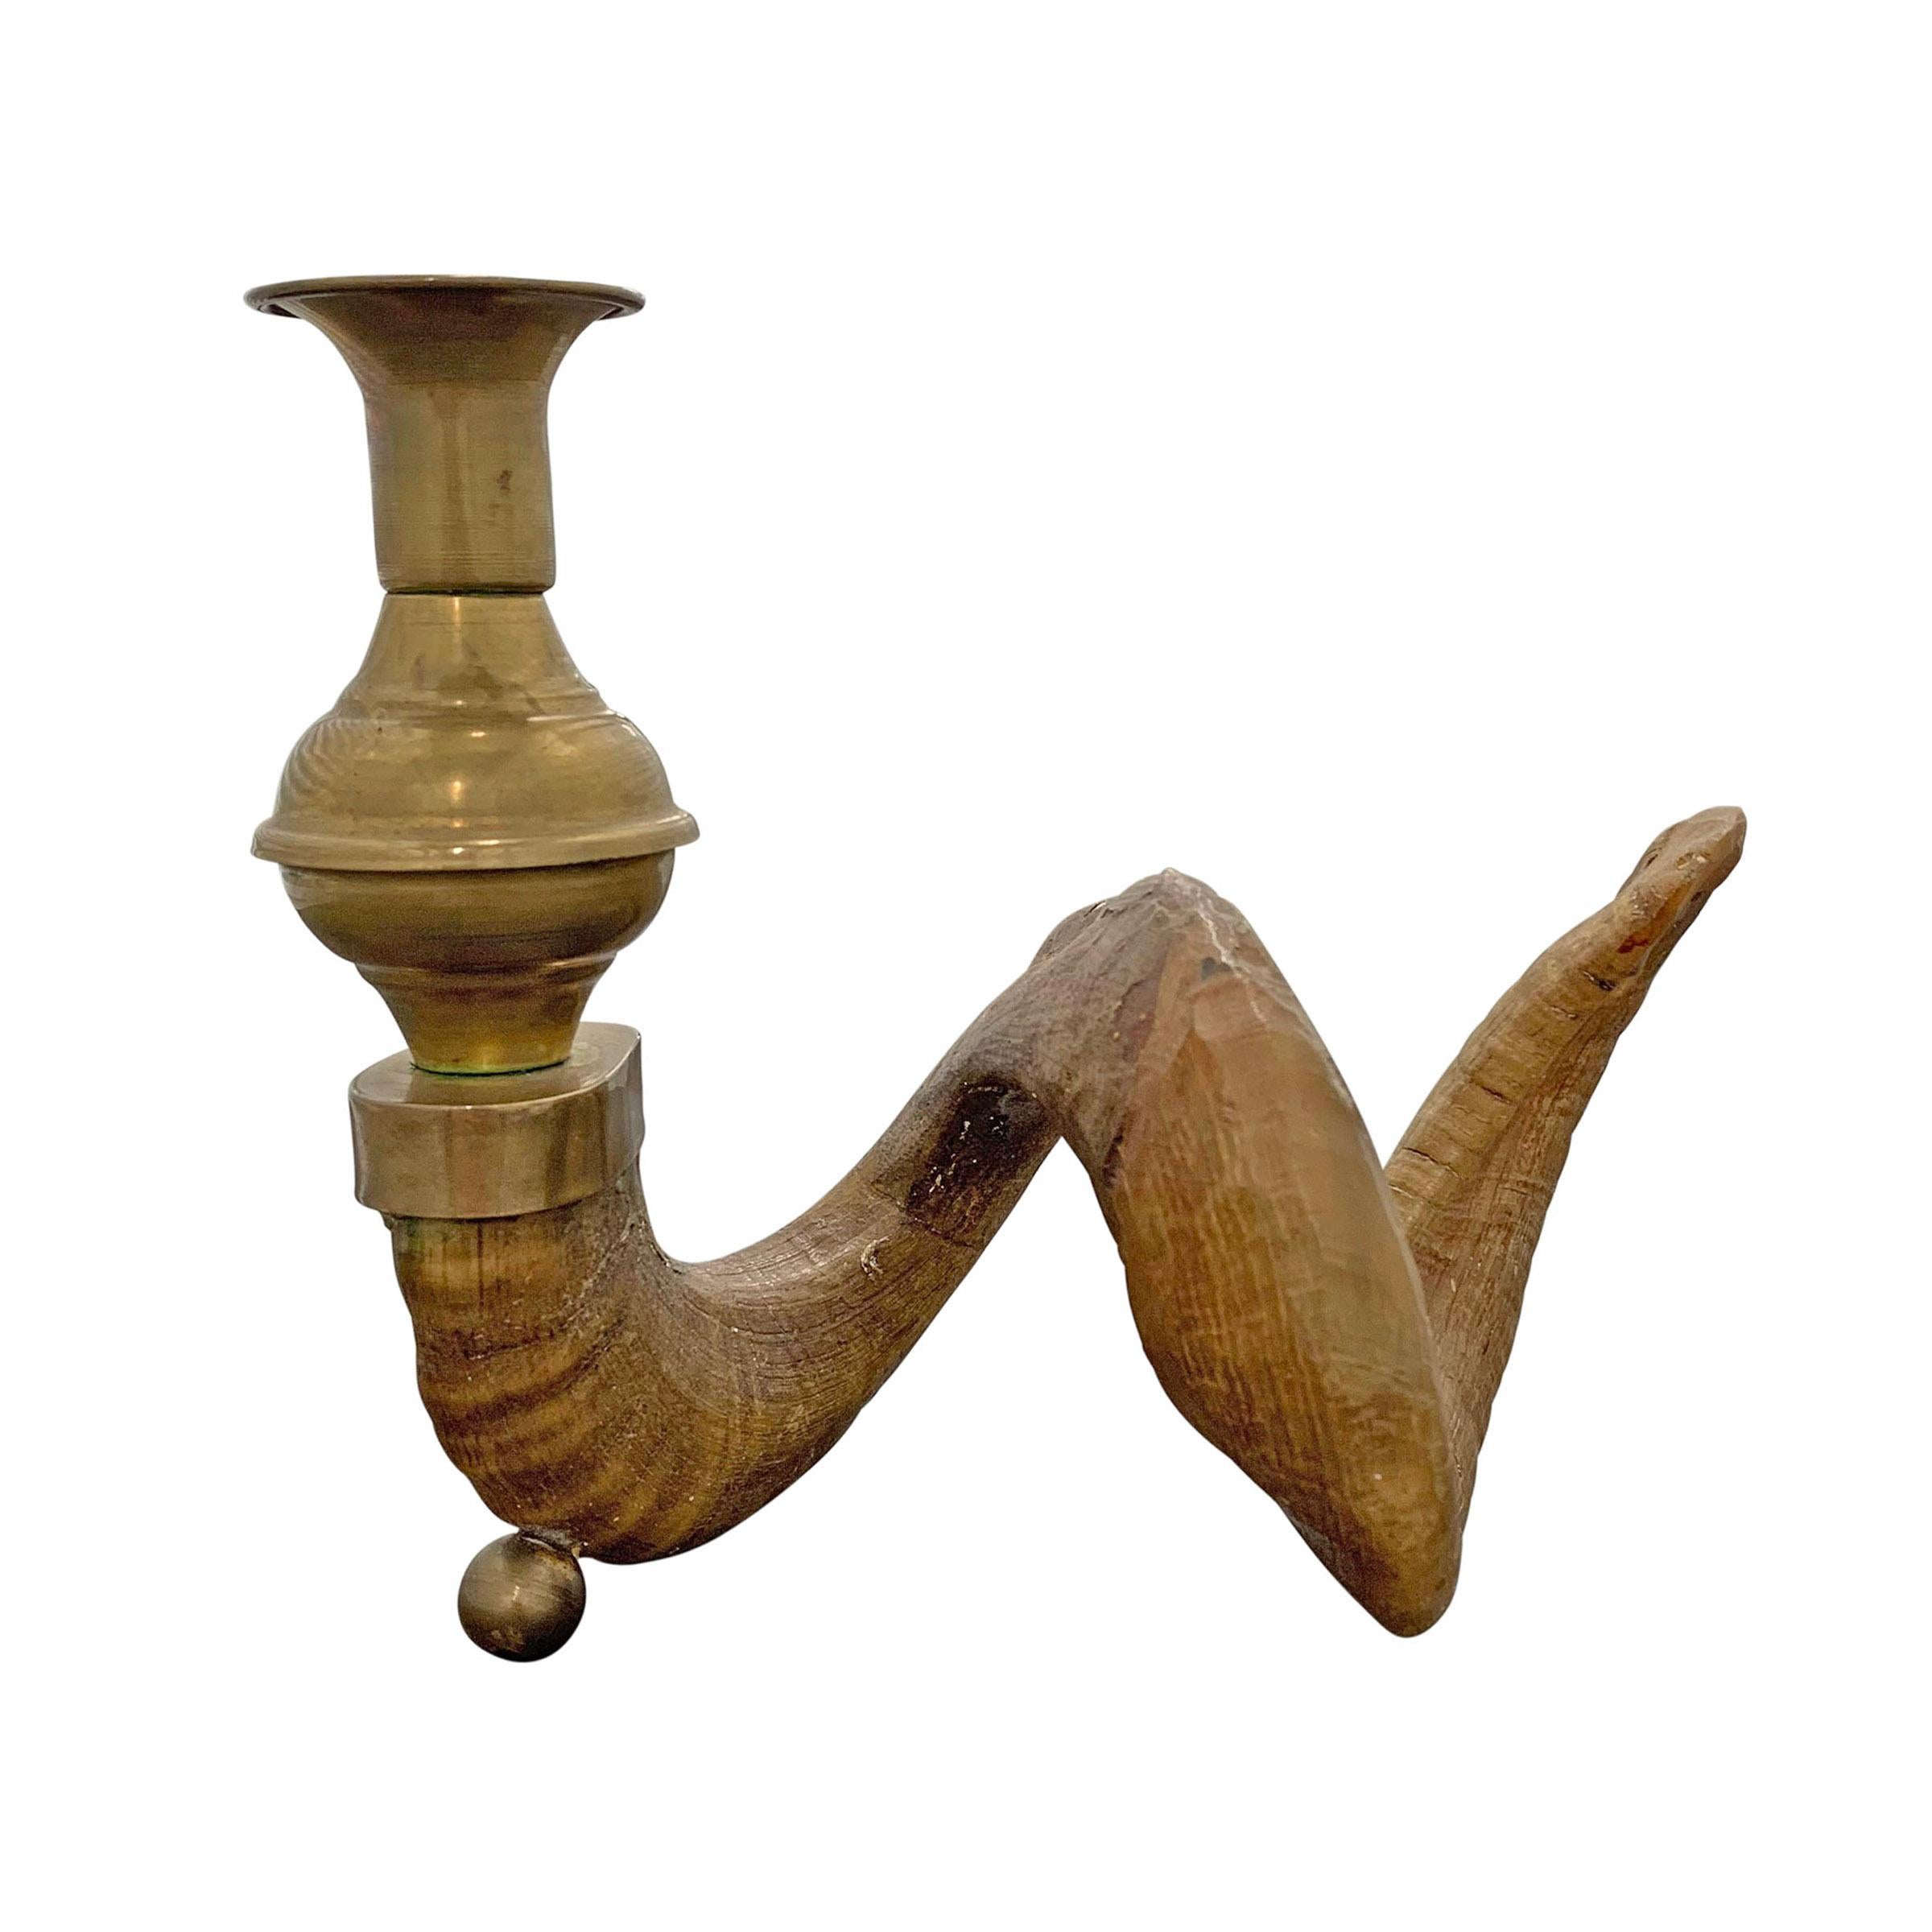 A fantastic mid-20th century American ram's horn candlestick with brass fittings resting a brass sphere foot.